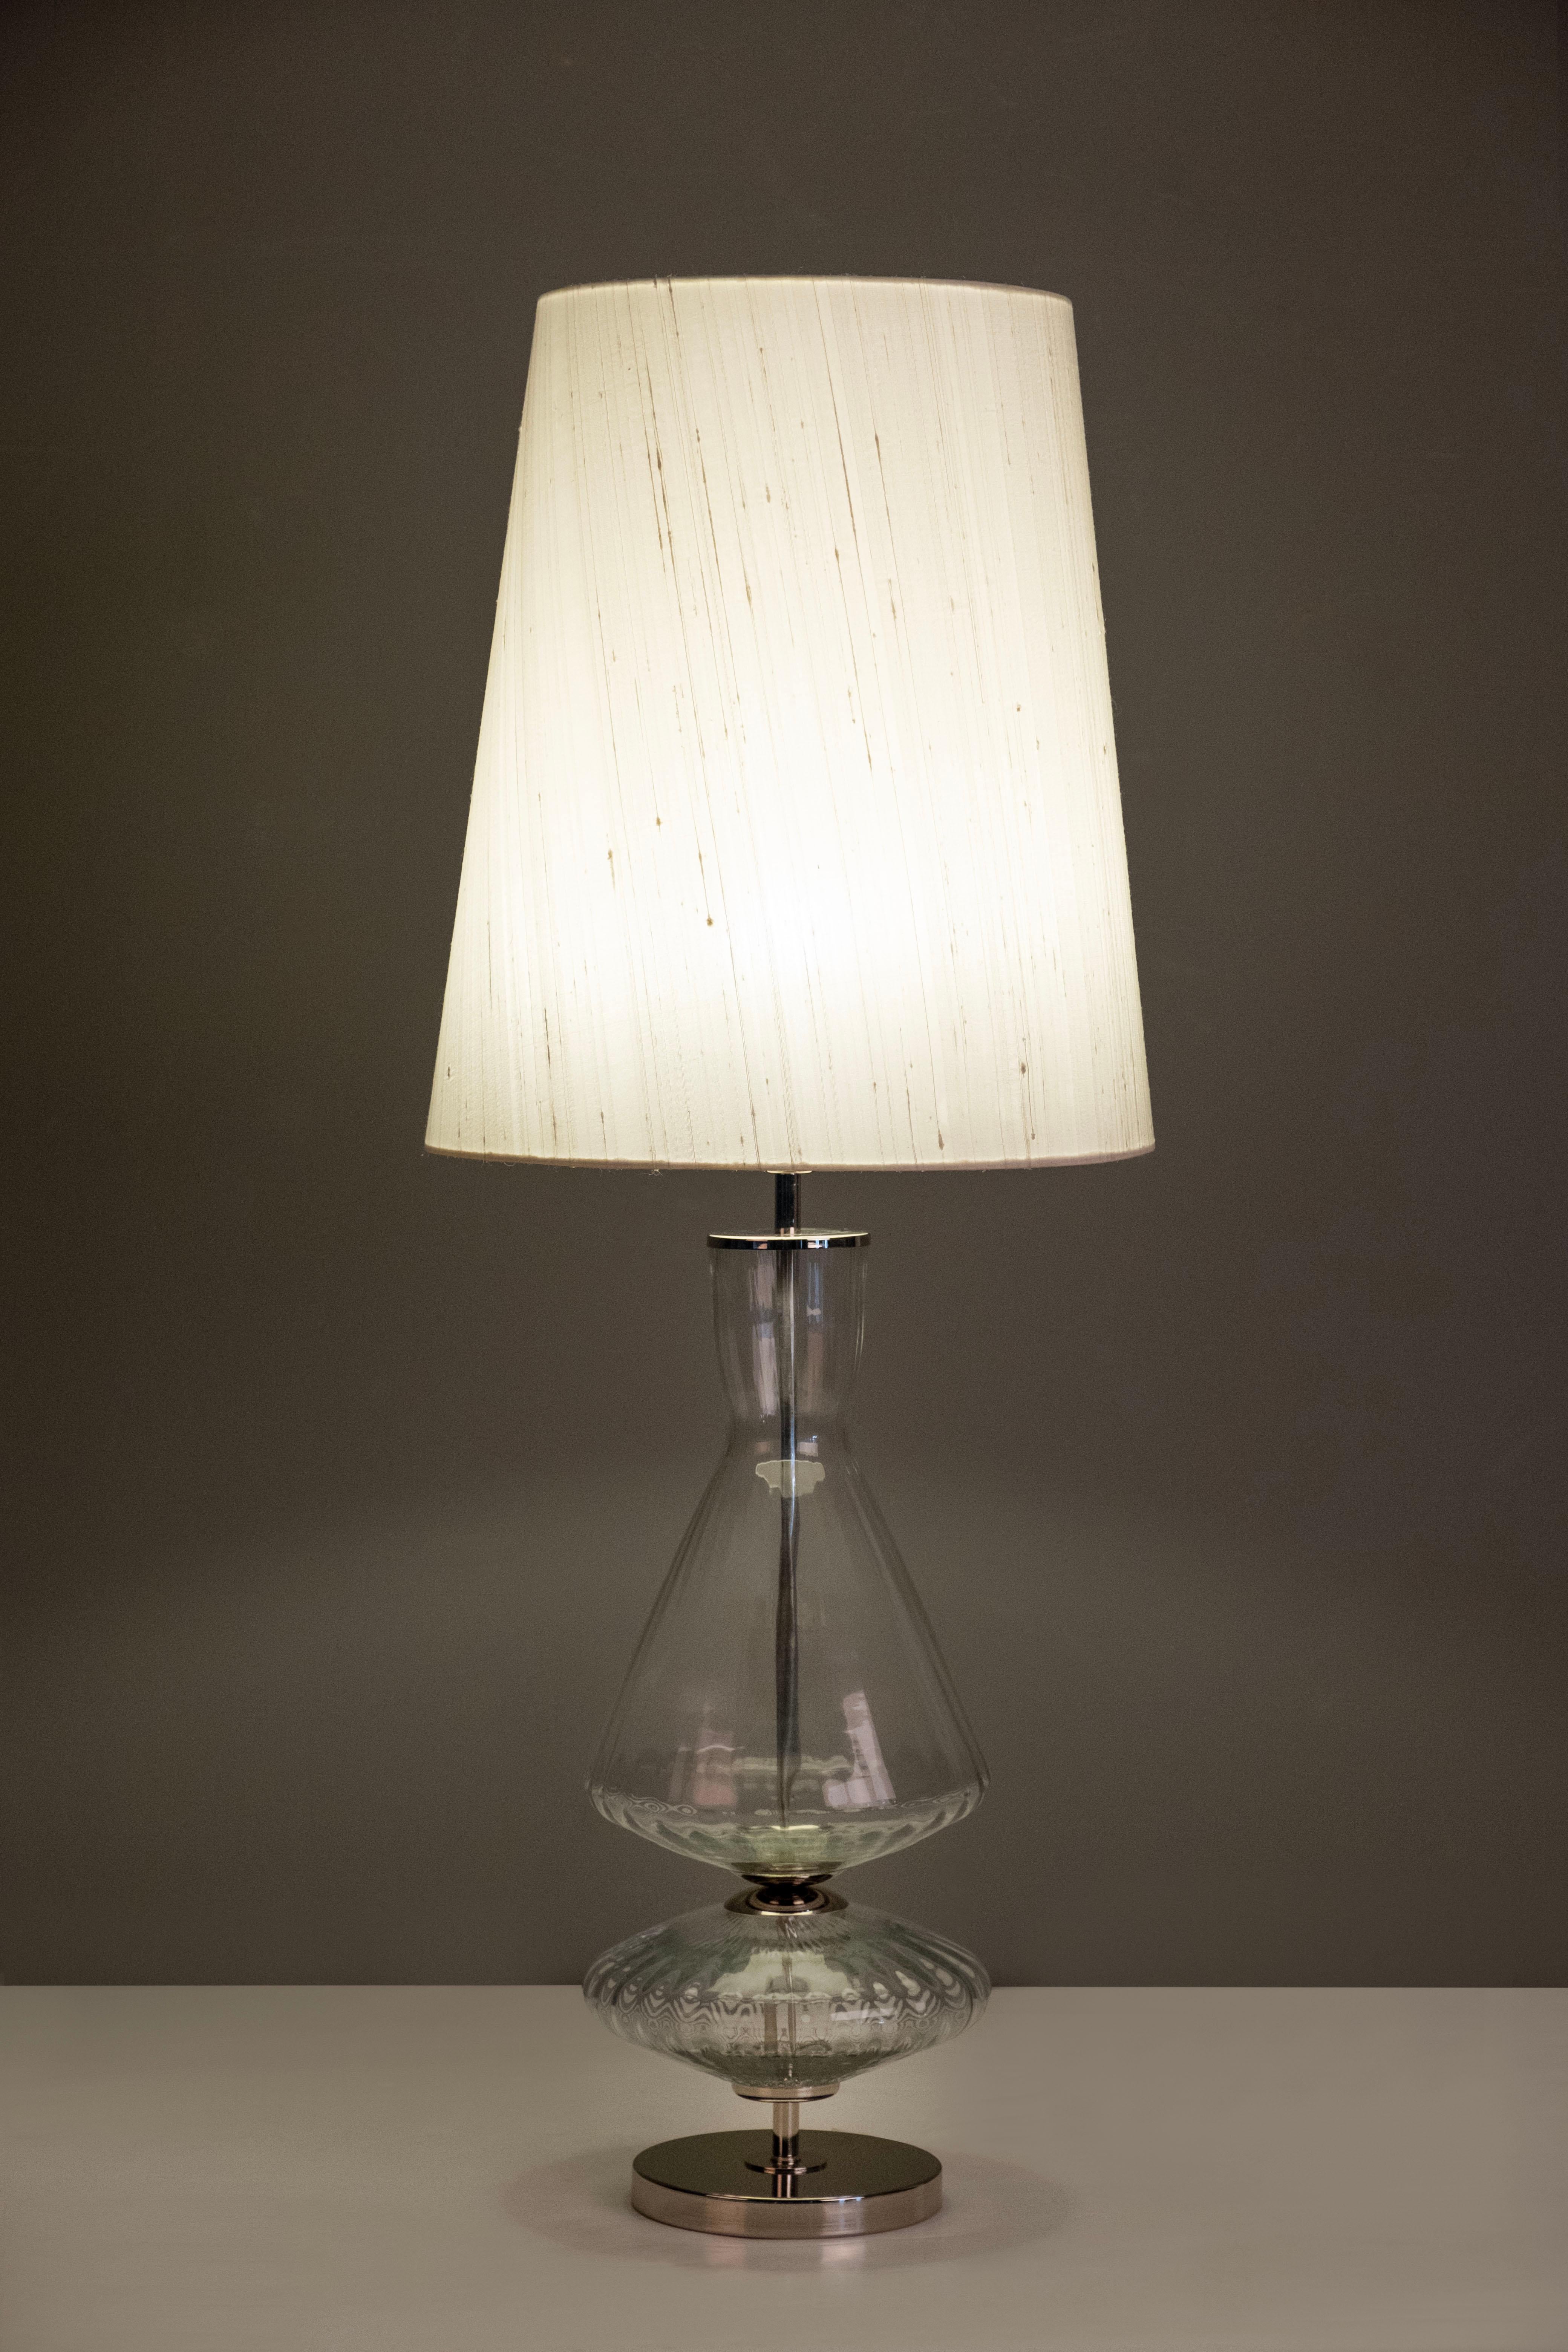 Set/2 Modern Table Lamps, Glass Base, Silk Lampshade, Handcrafted in Portugal - Europe by GF Modern.

This is an elegant table lamp and an attractive addition to a modern home. The clear glass and polished stainless steel gracefully combine with the